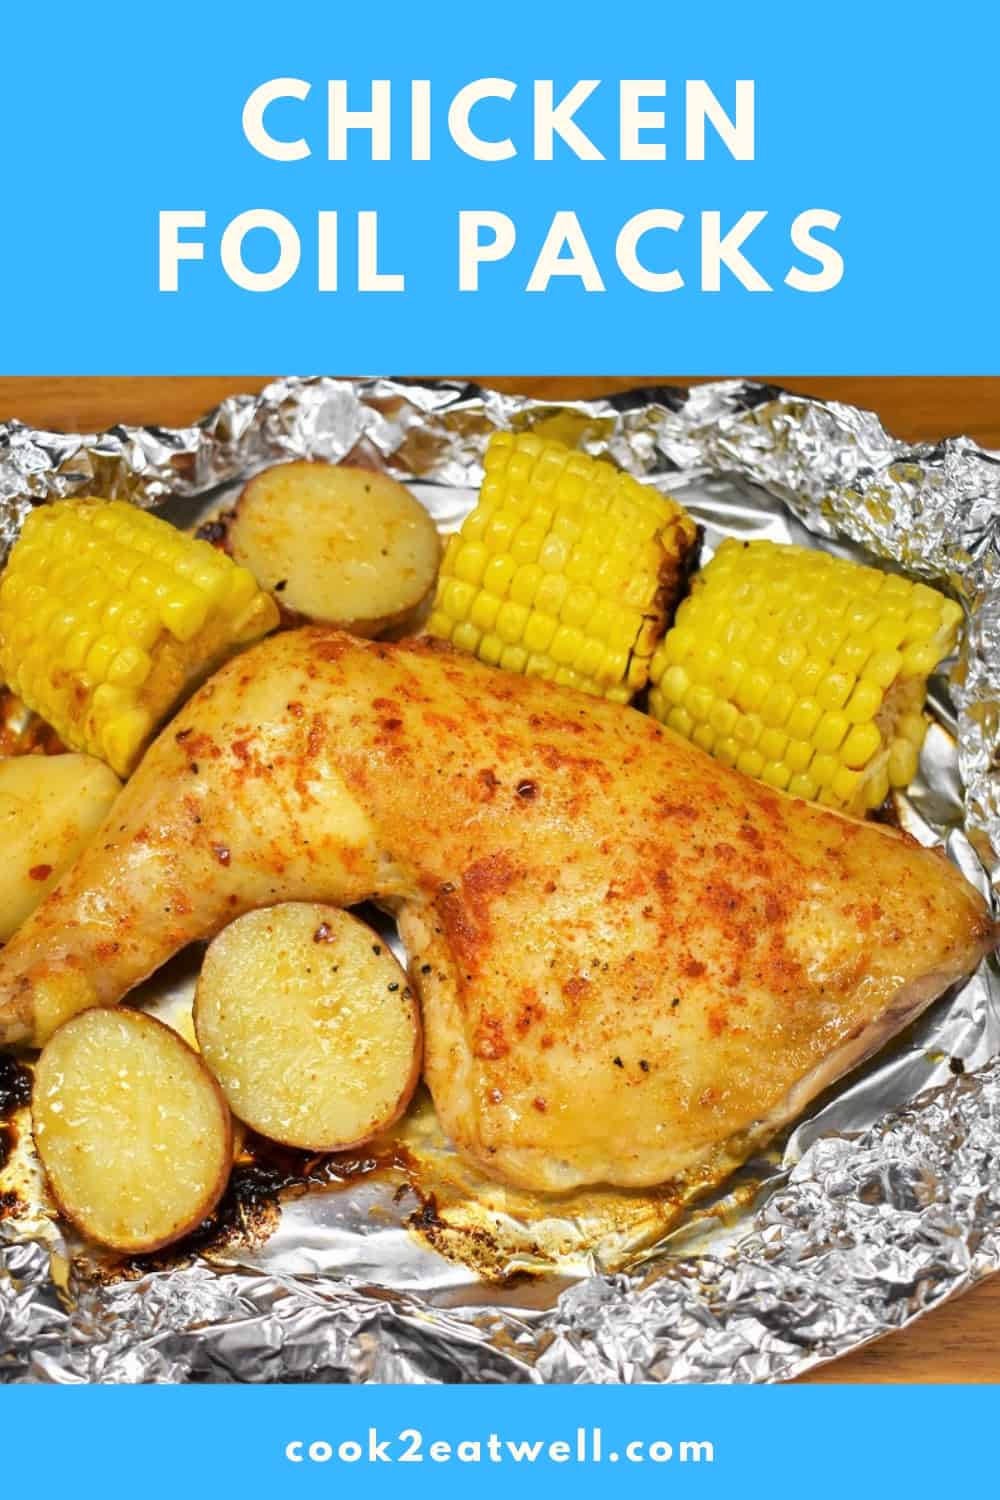 Chicken Foil Packs - Cook2eatwell